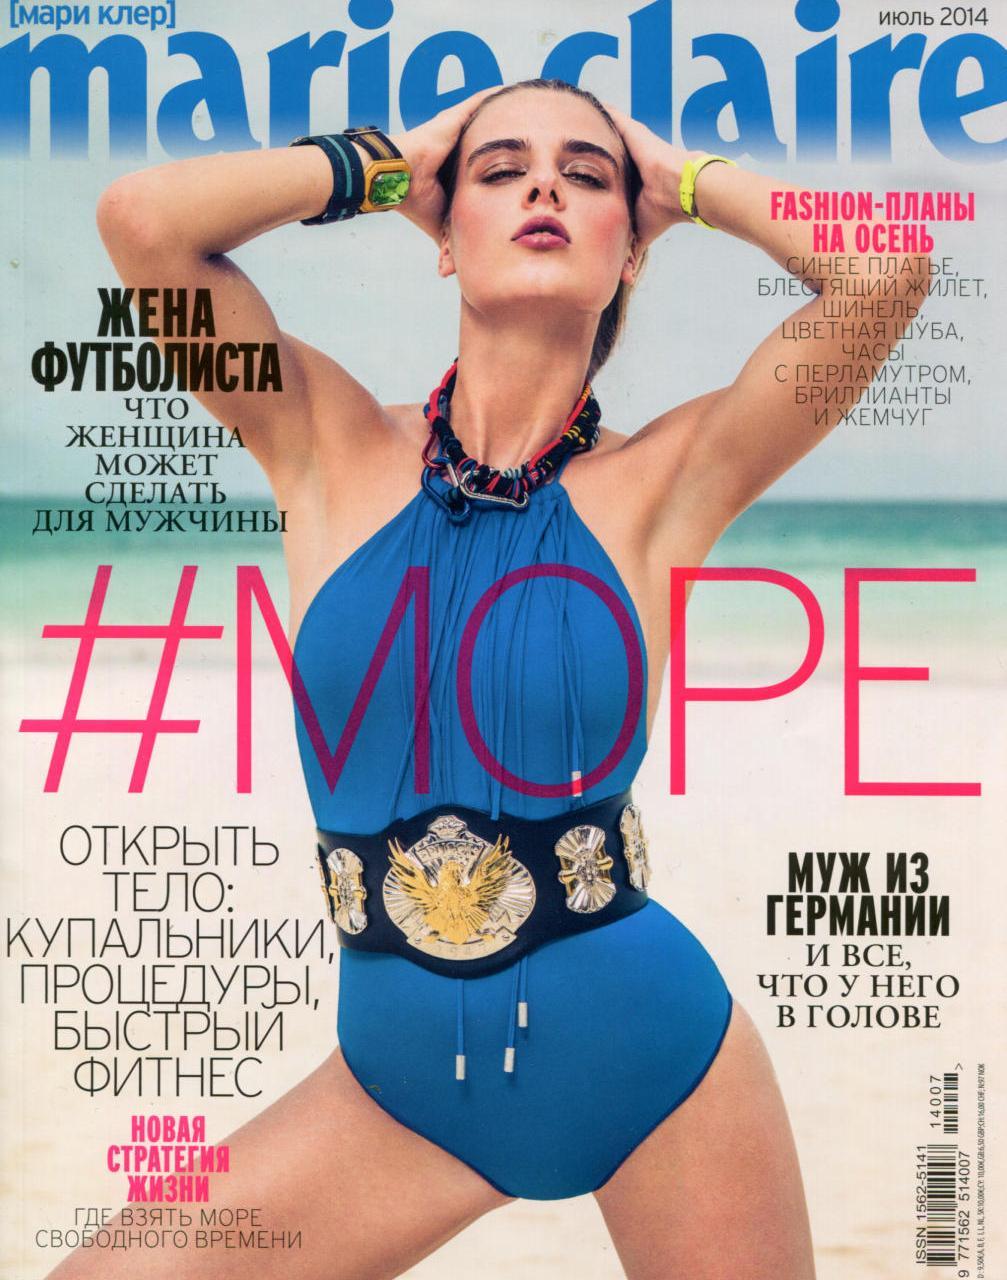 Marie Claire RUSSIA 2014-7-1 Cover